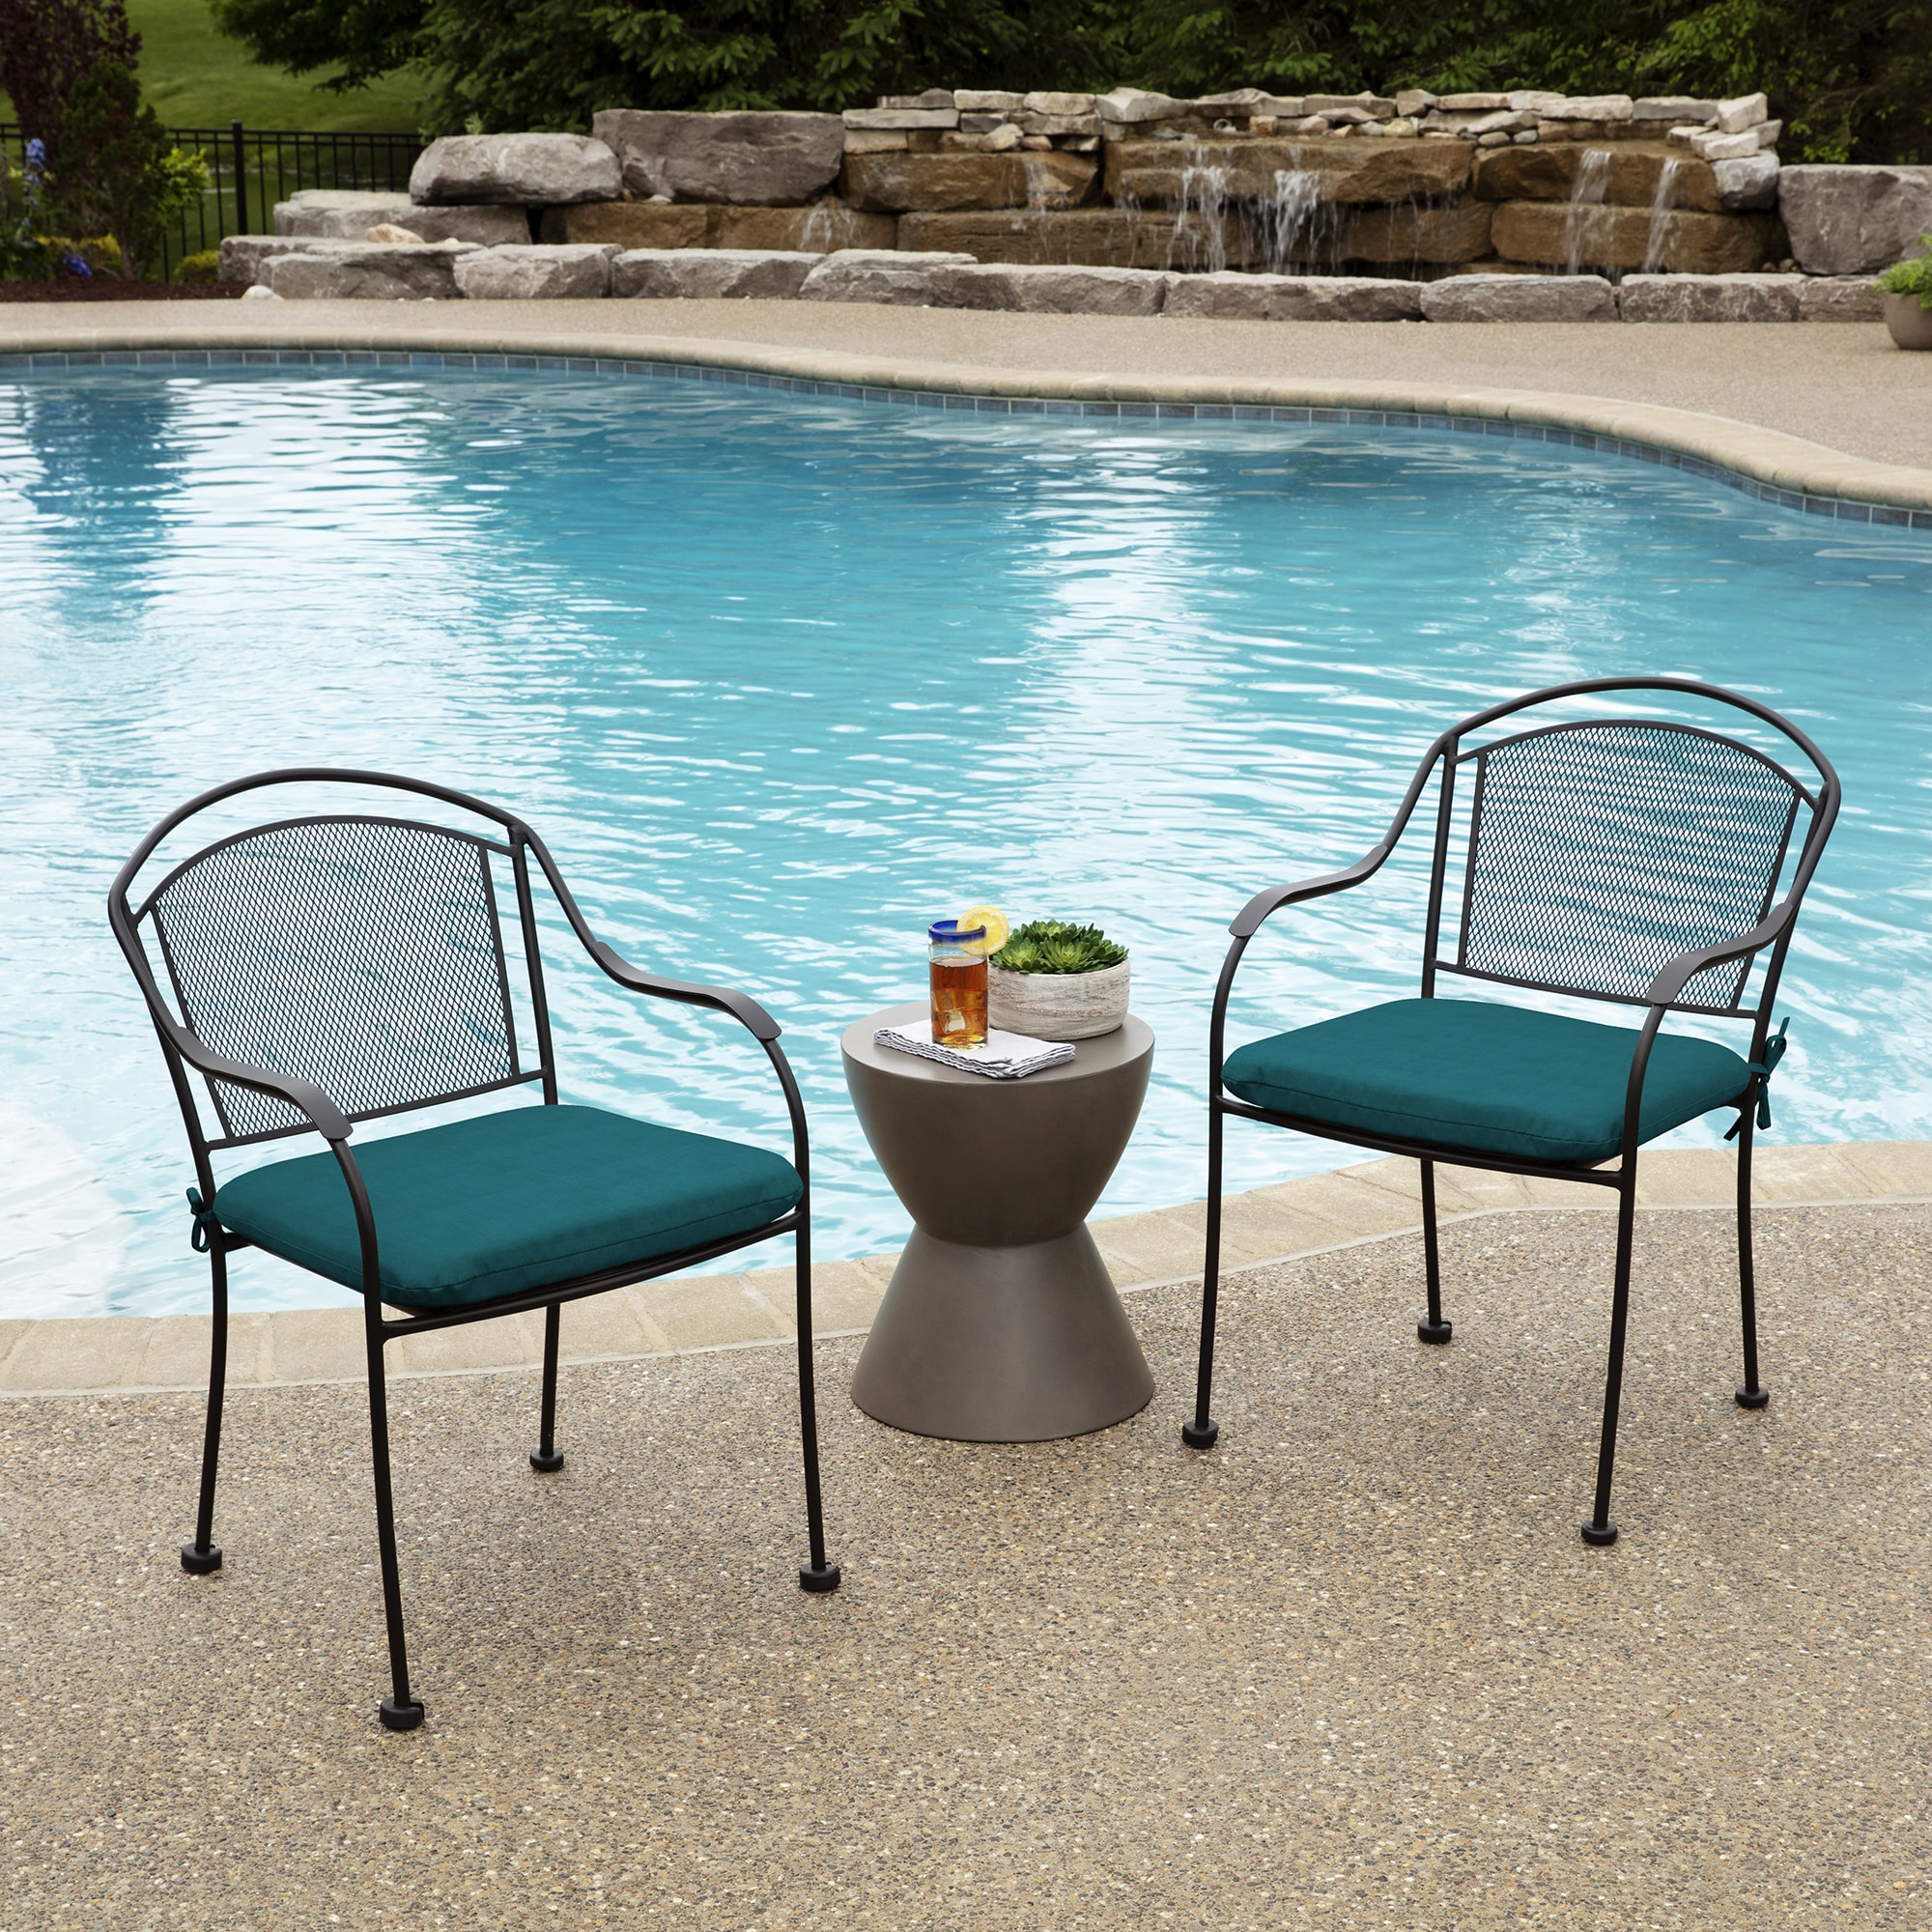 Kensington Garden 2pc 24x22 Solid Outdoor Seat And Back Chair Cushion Set  Teal : Target